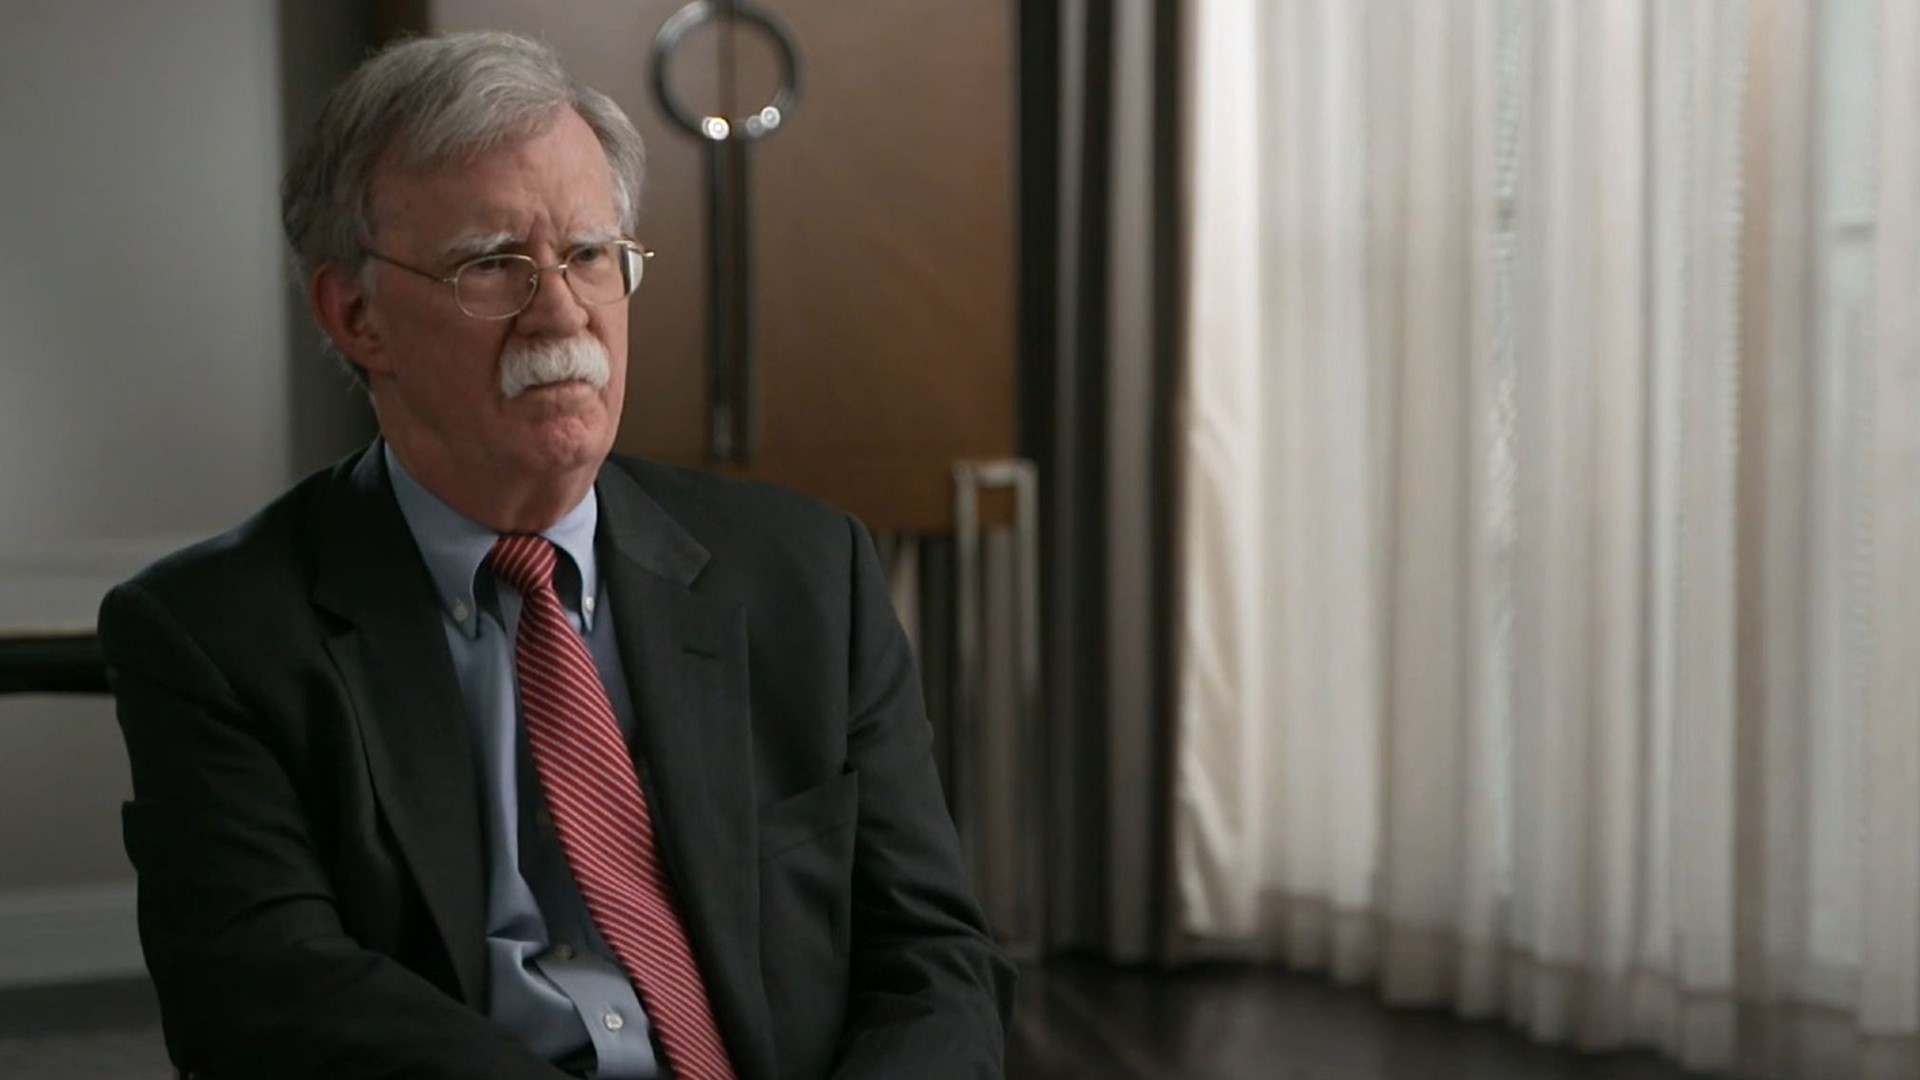 Former National Security Adviser John Bolton called President Donald Trump’s comments about him “unbecoming of the office of president.”